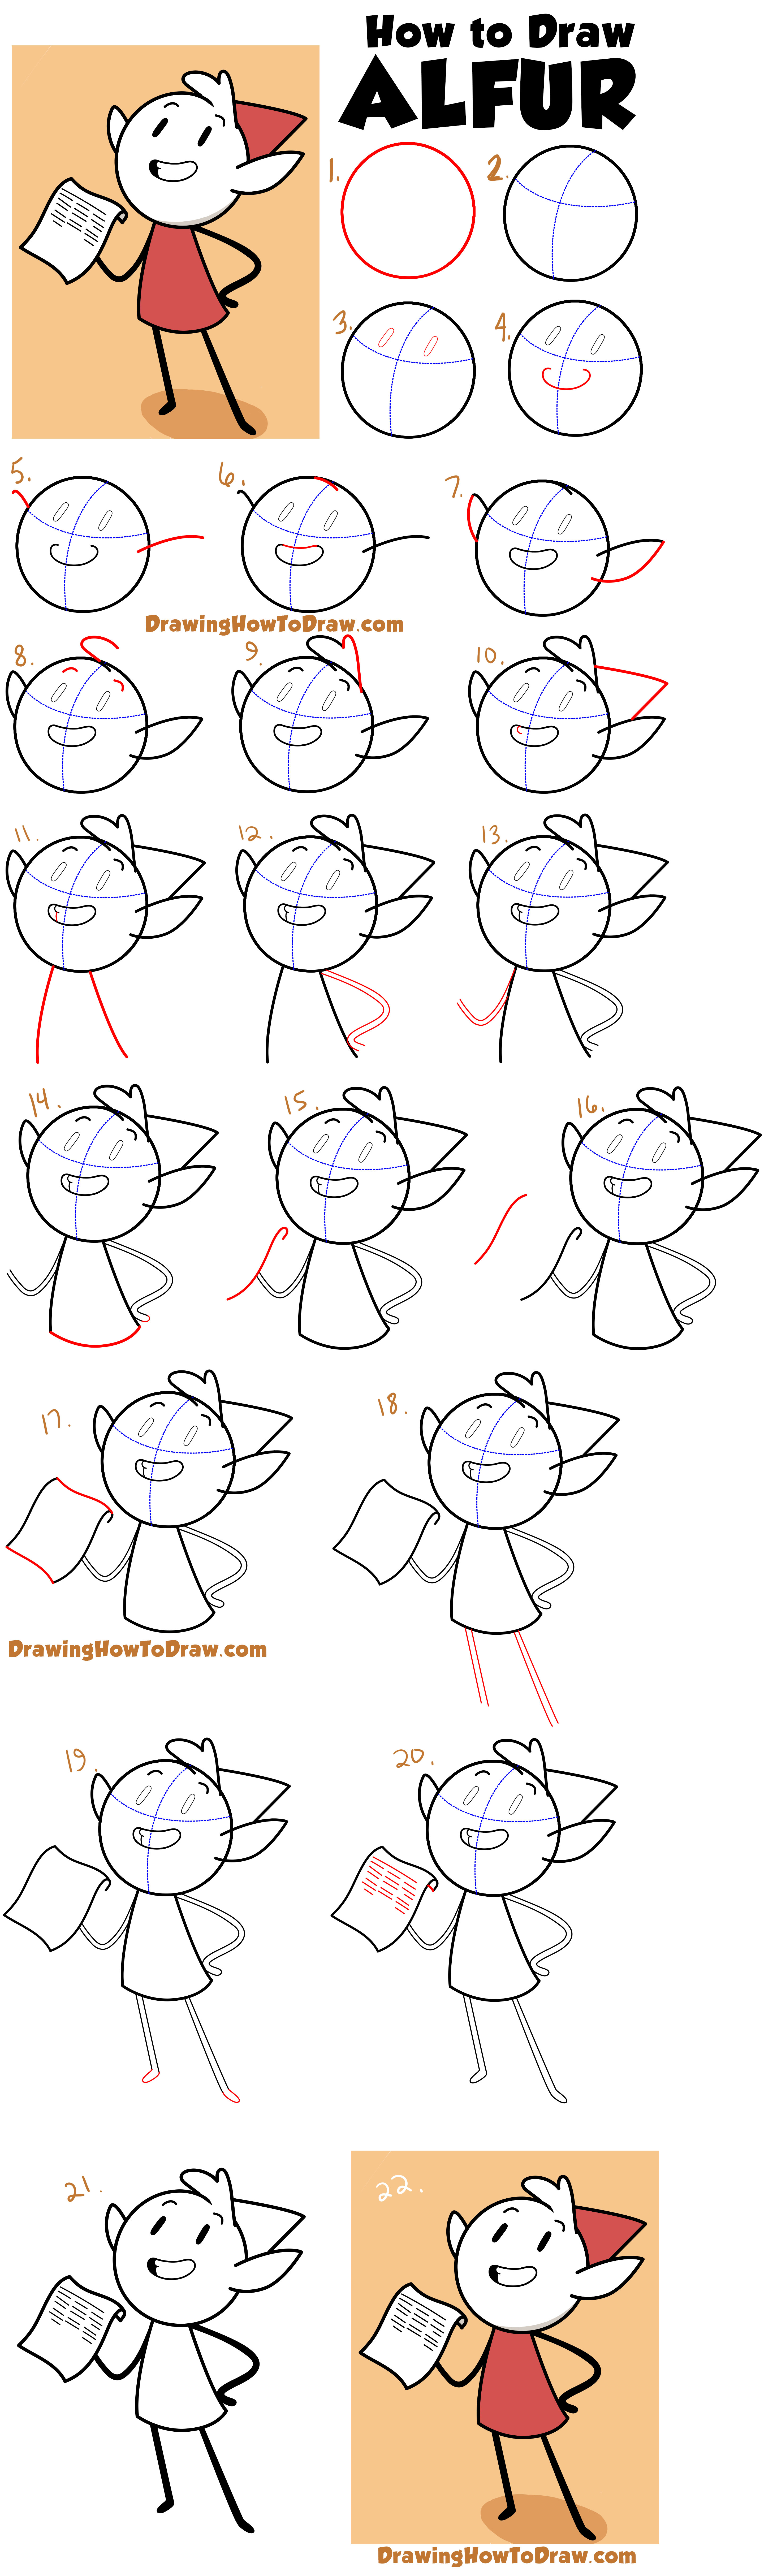 How to Draw Alfur the Elf from Hilda Easy Step by Step Drawing Tutorial ...